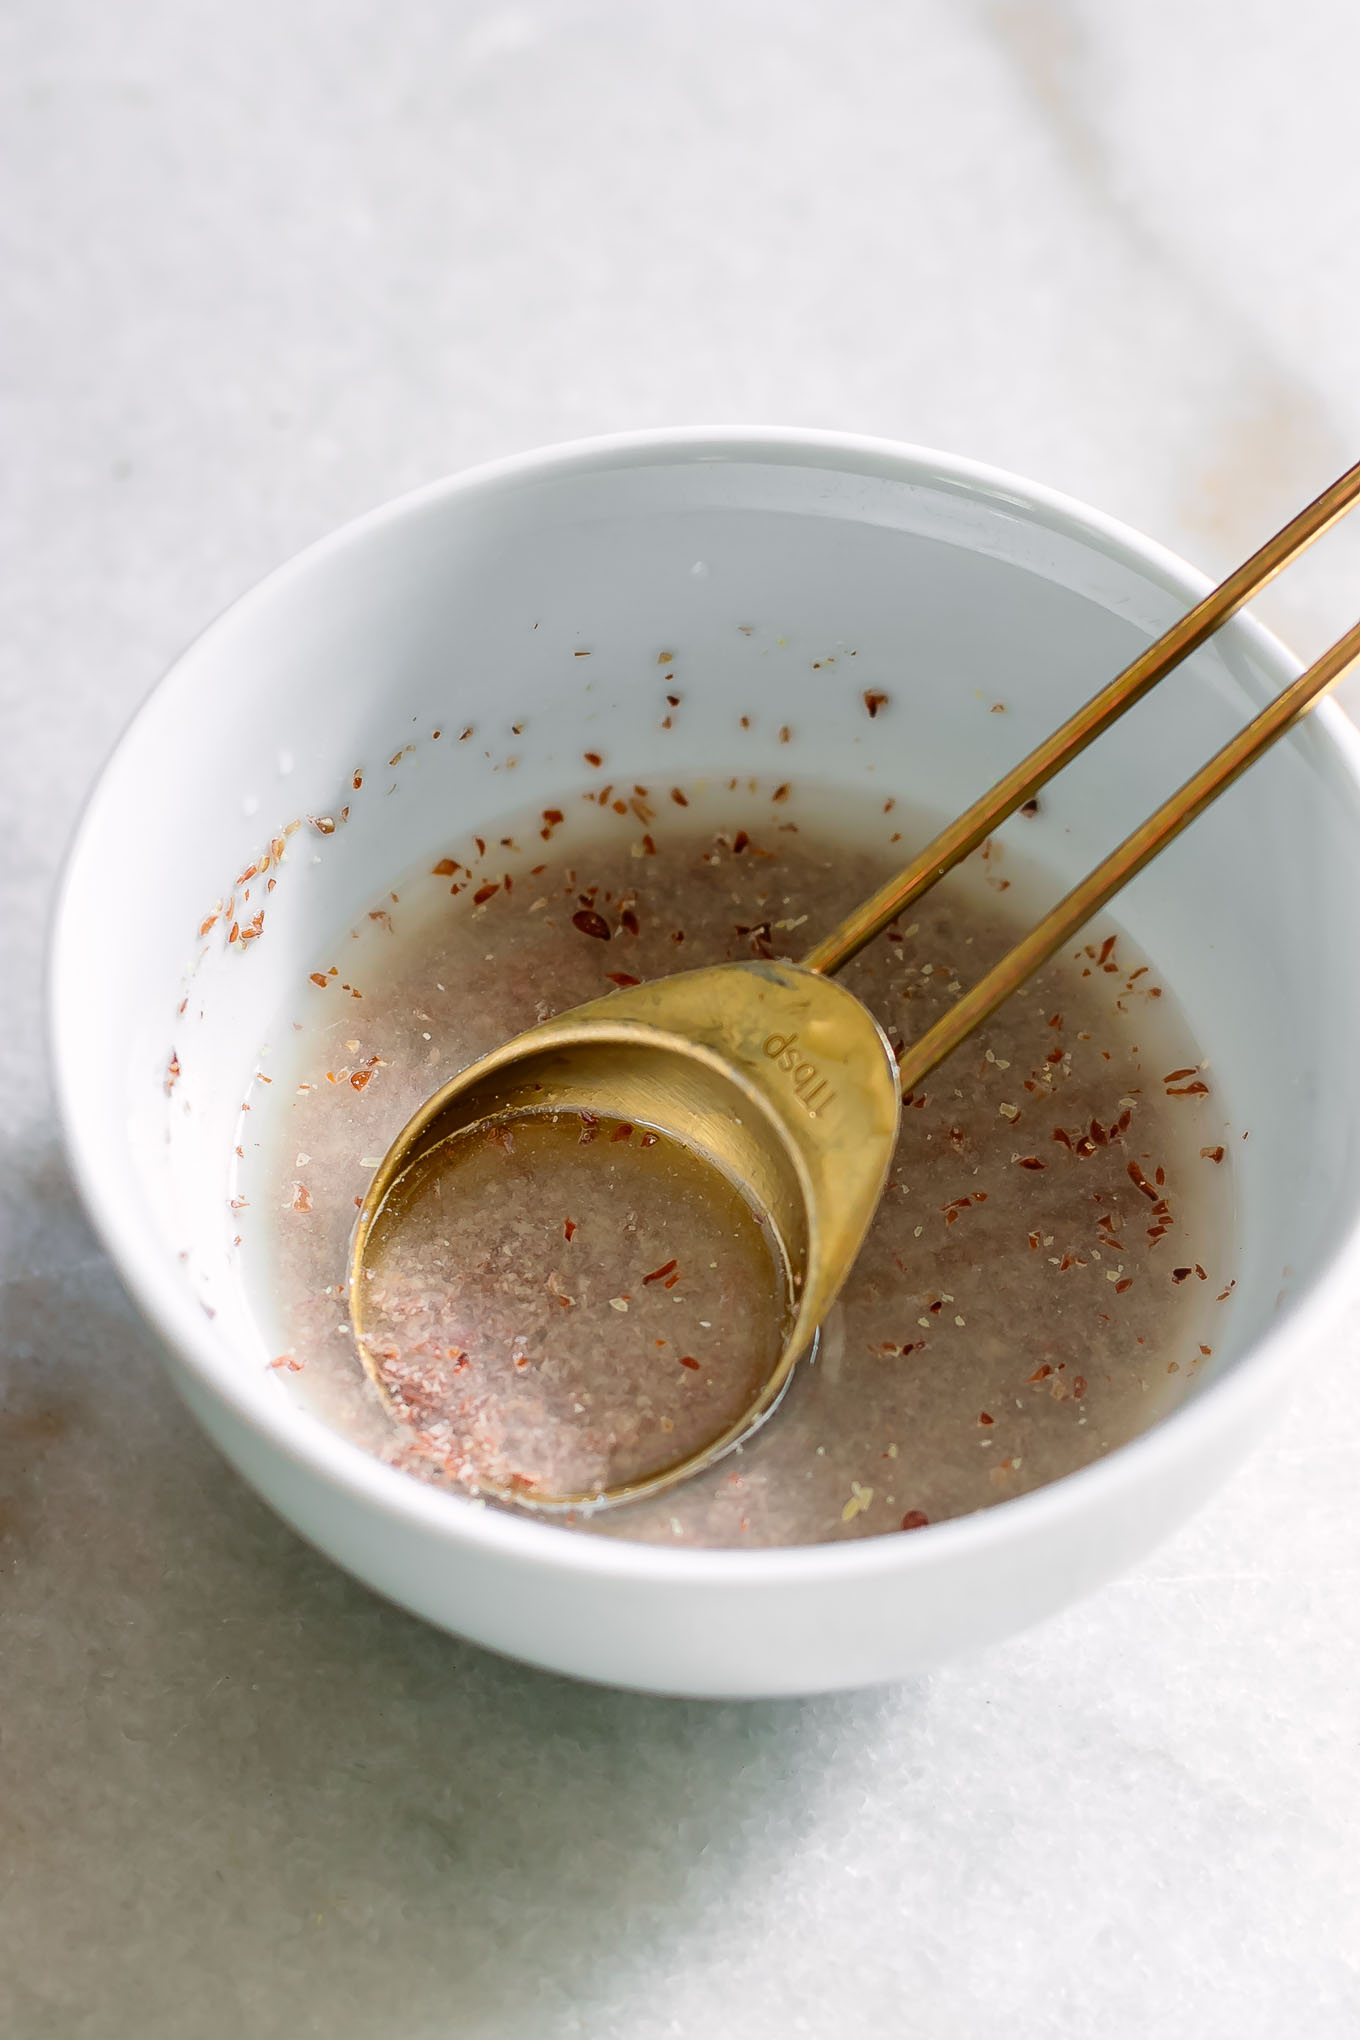 a flax egg made with ground flax seed and water in a white bowl with a gold spoon